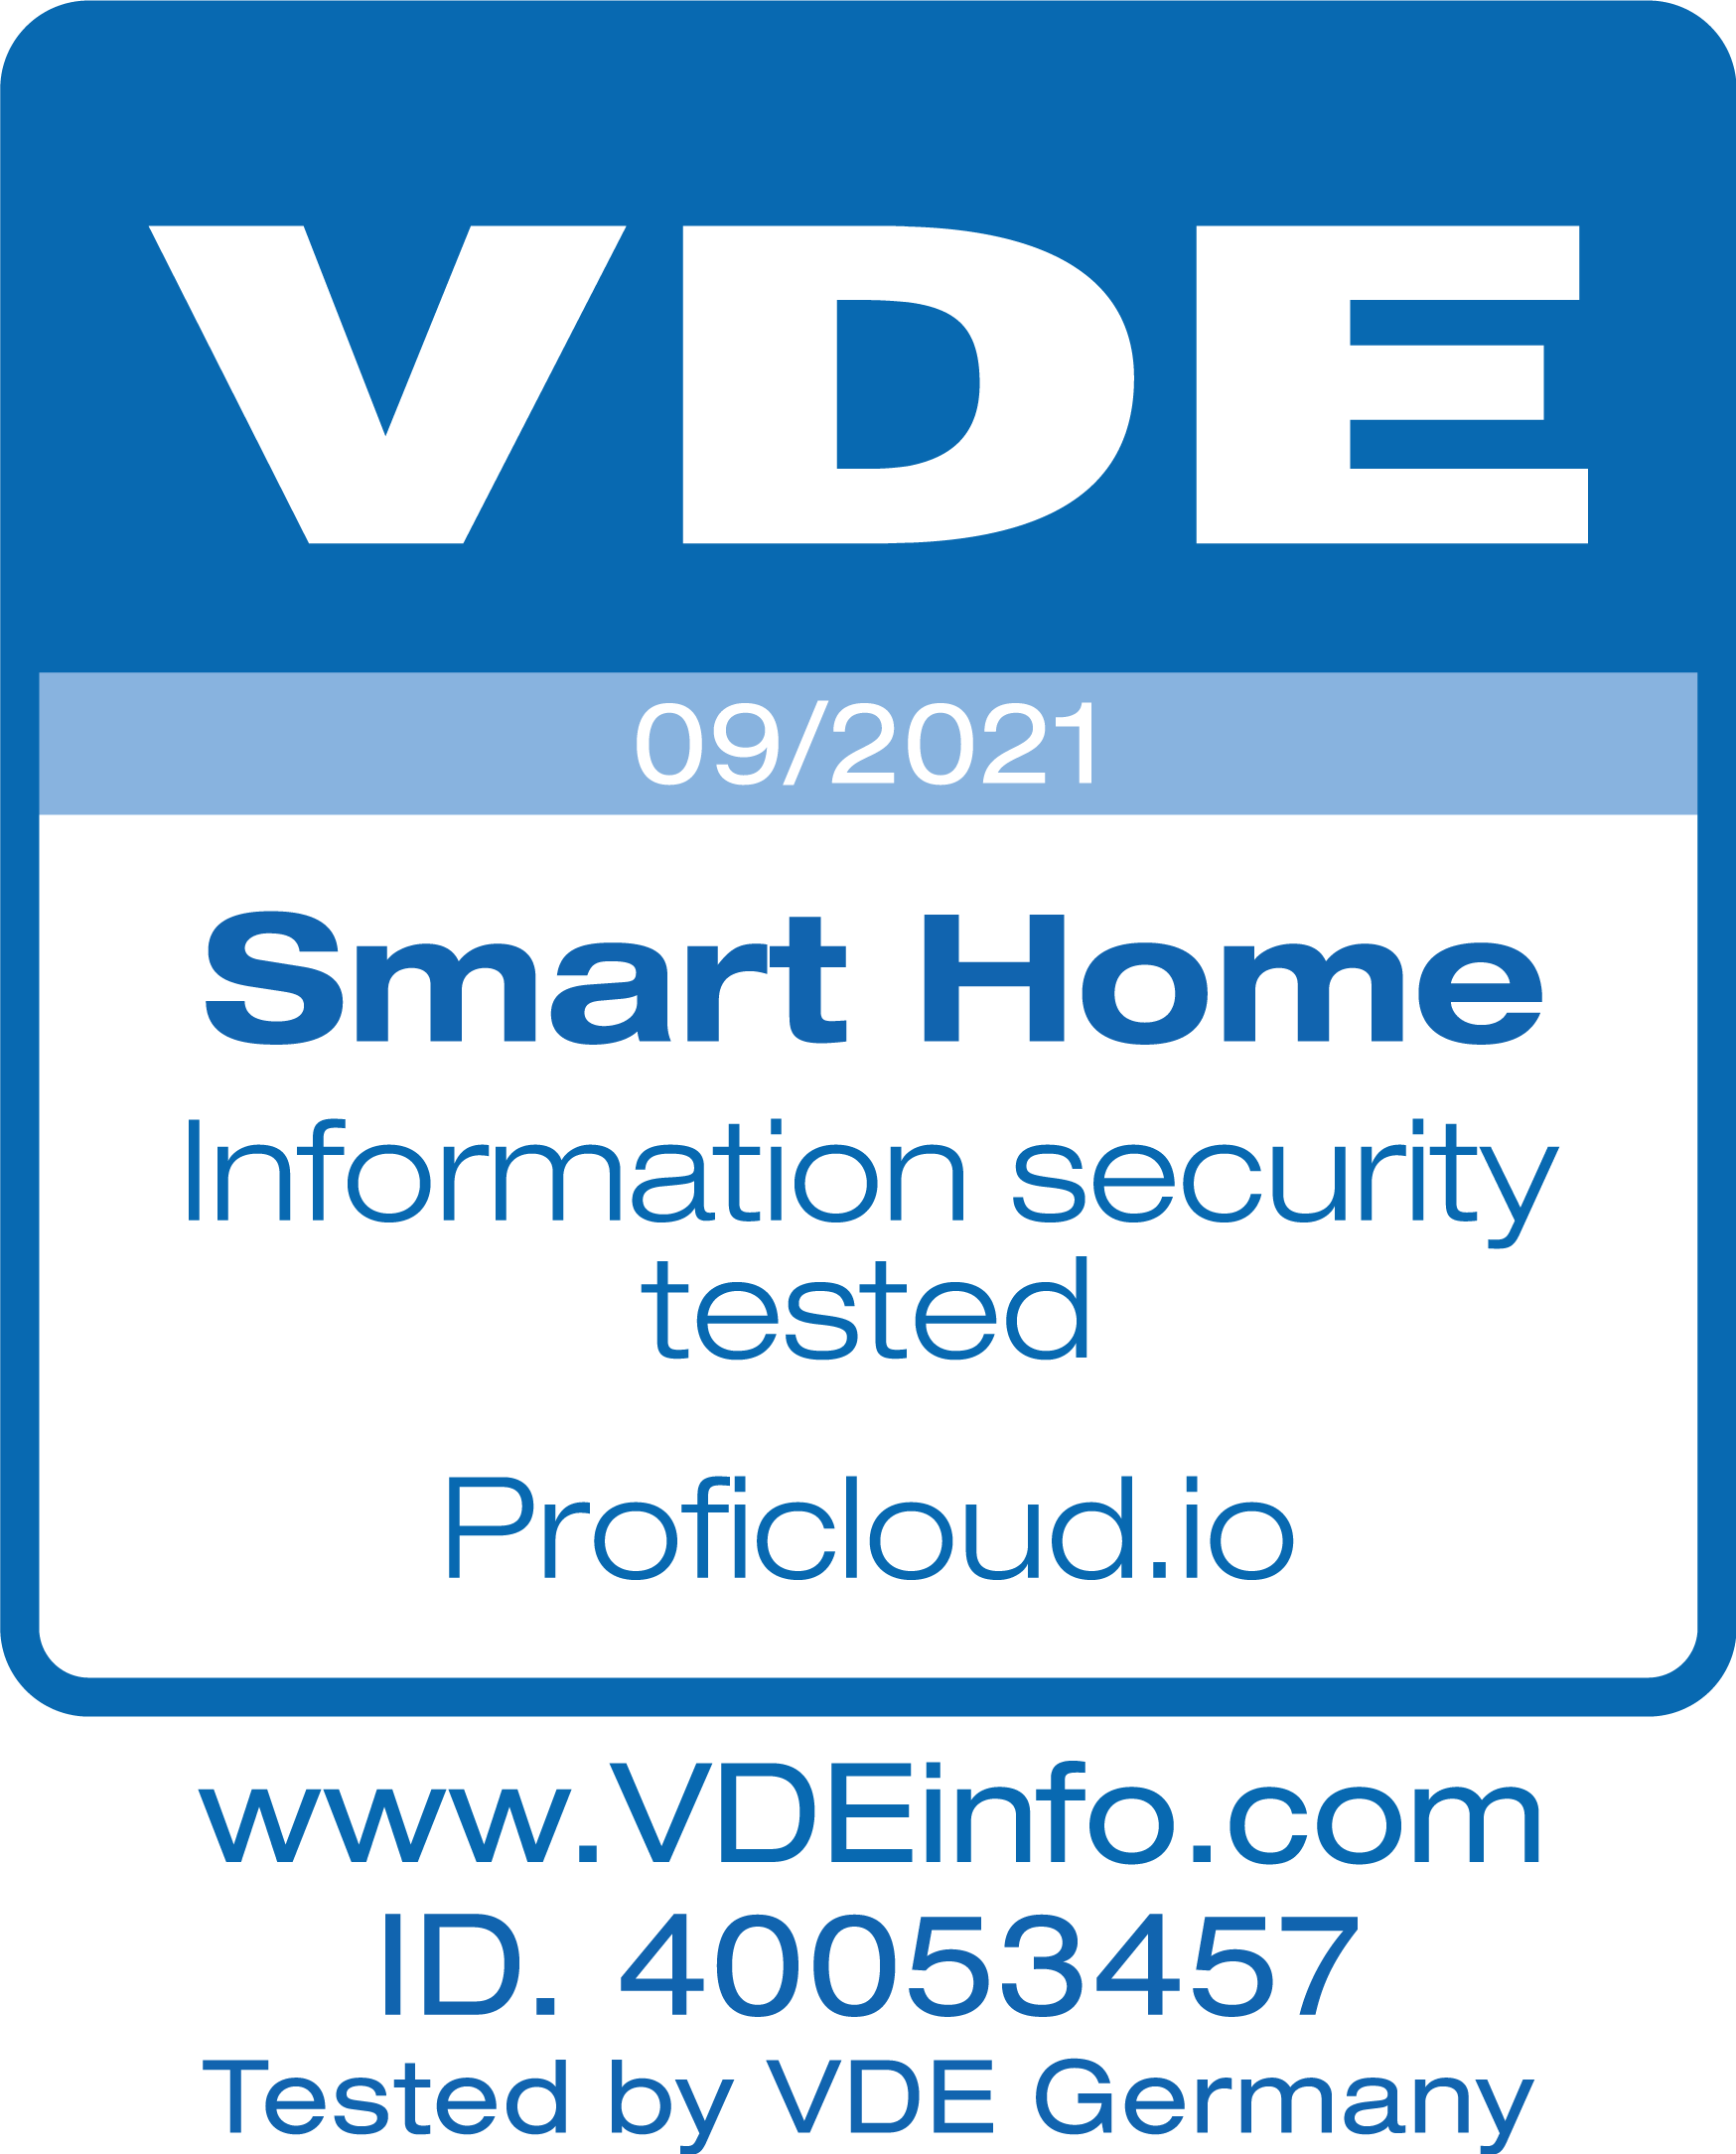 Learn more about the VDE Certification on Proficloud.io here.